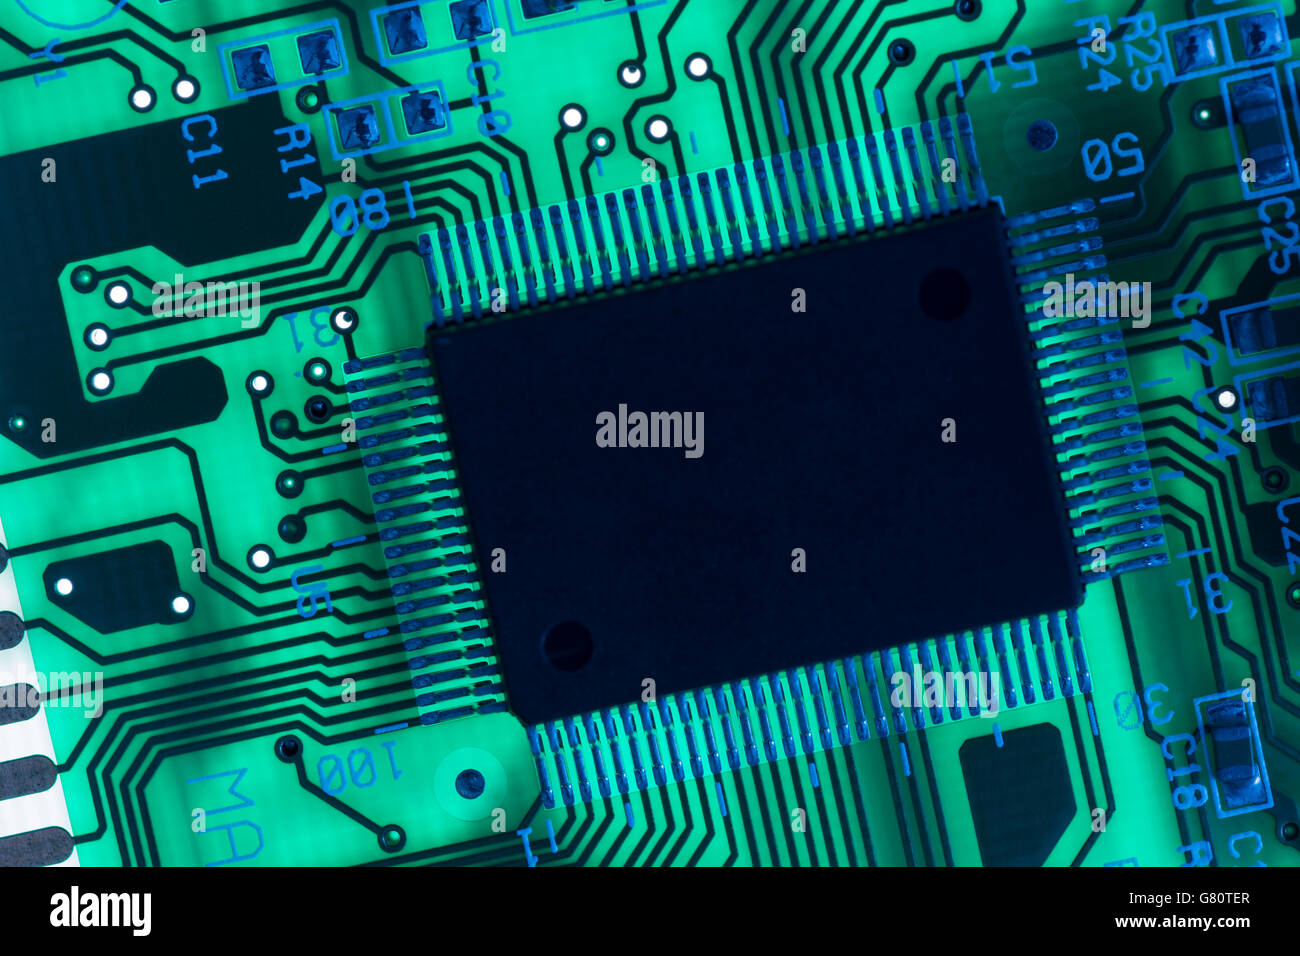 Technology concept. Circuit board / pcb showing components lit with blue and green light. Wiring inside computer, circuit close up, electronics Stock Photo